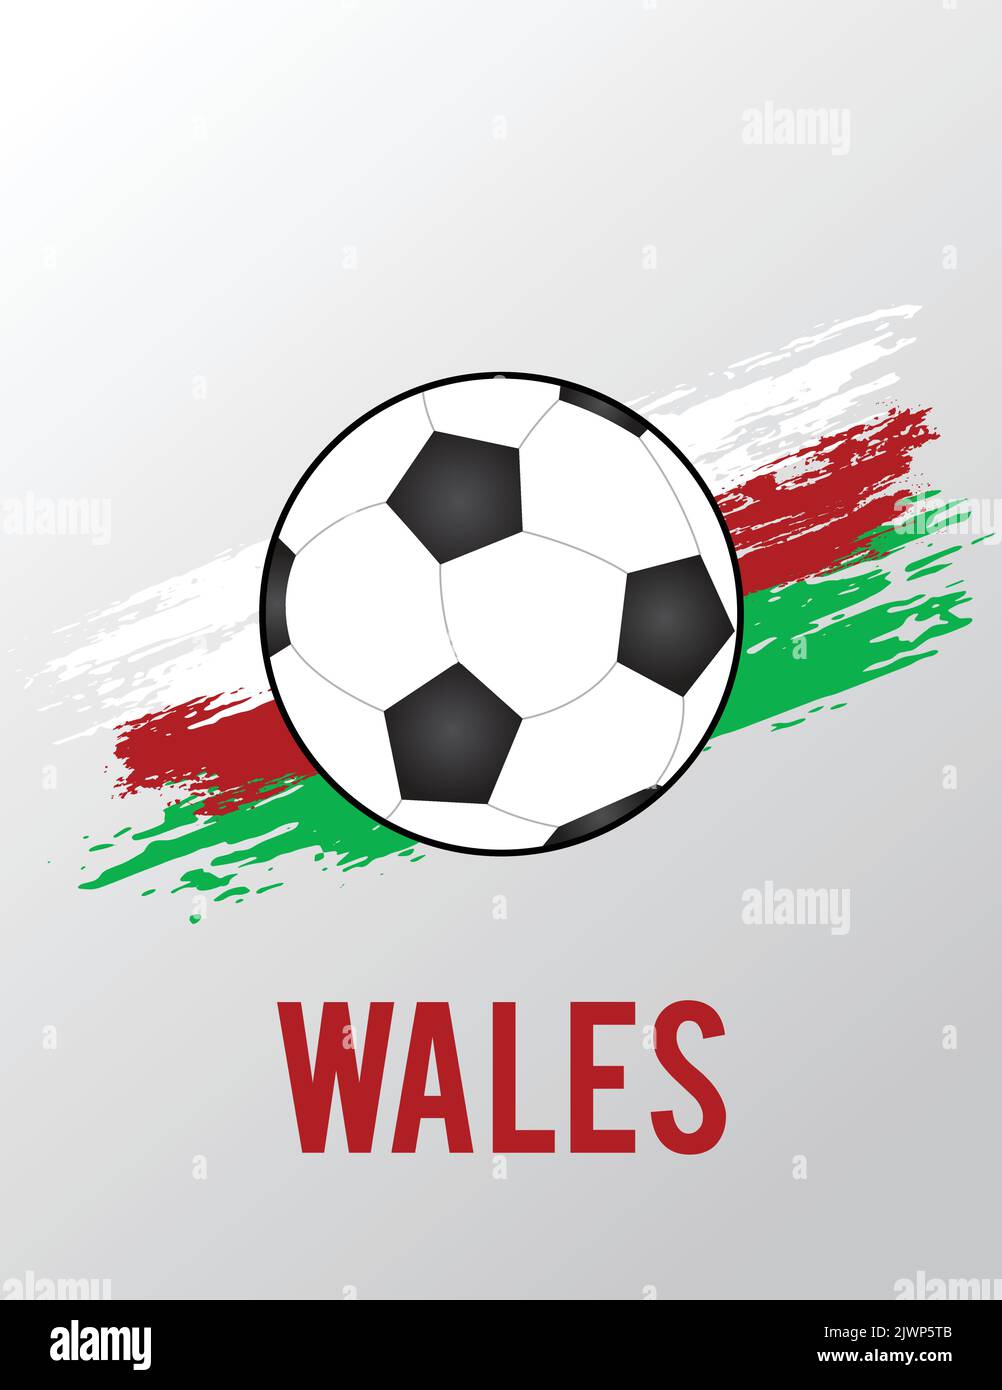 Wales flag with Brush Efect for Soccer Theme Stock Vector